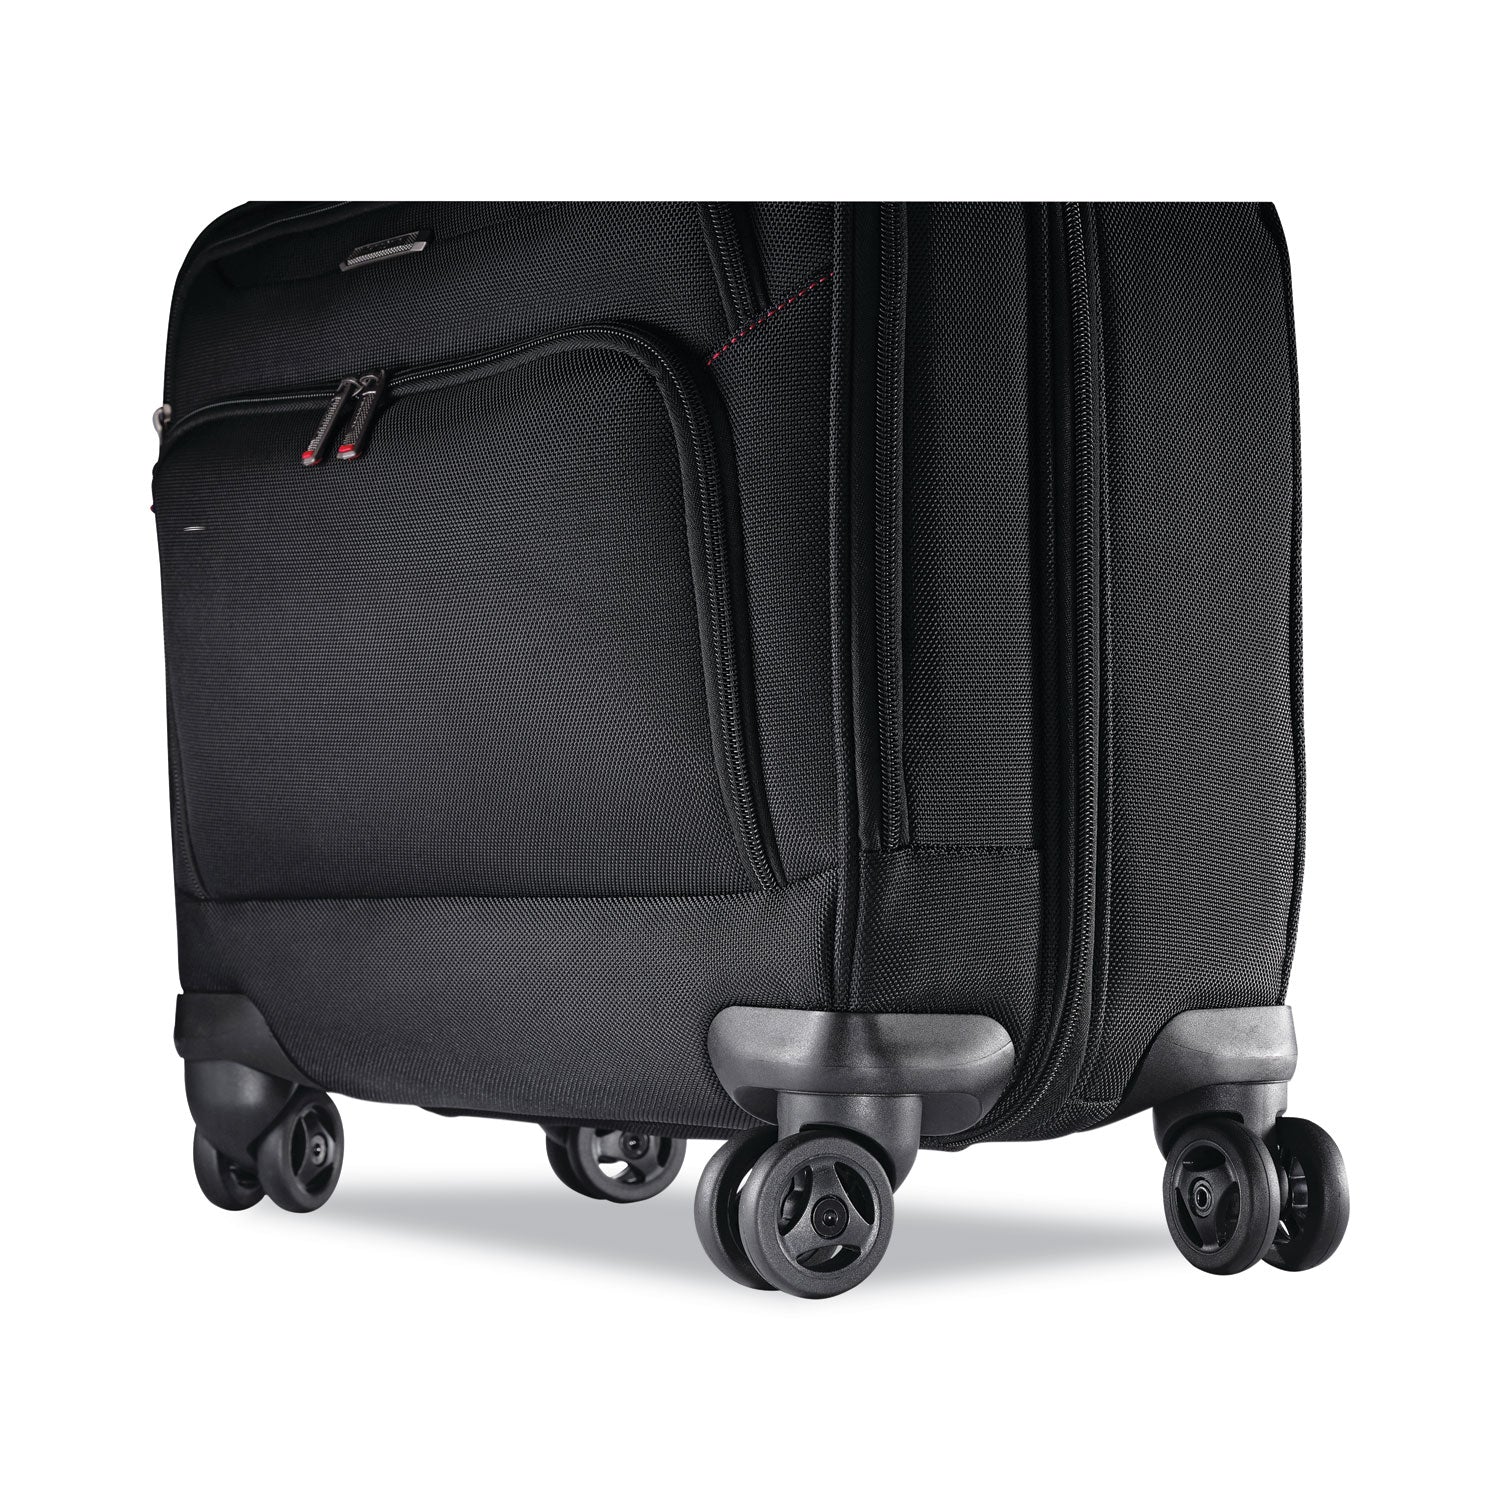 xenon-3-spinner-mobile-office-fits-devices-up-to-156-ballistic-polyester-1325-x-725-x-1625-black_sml894381041 - 4